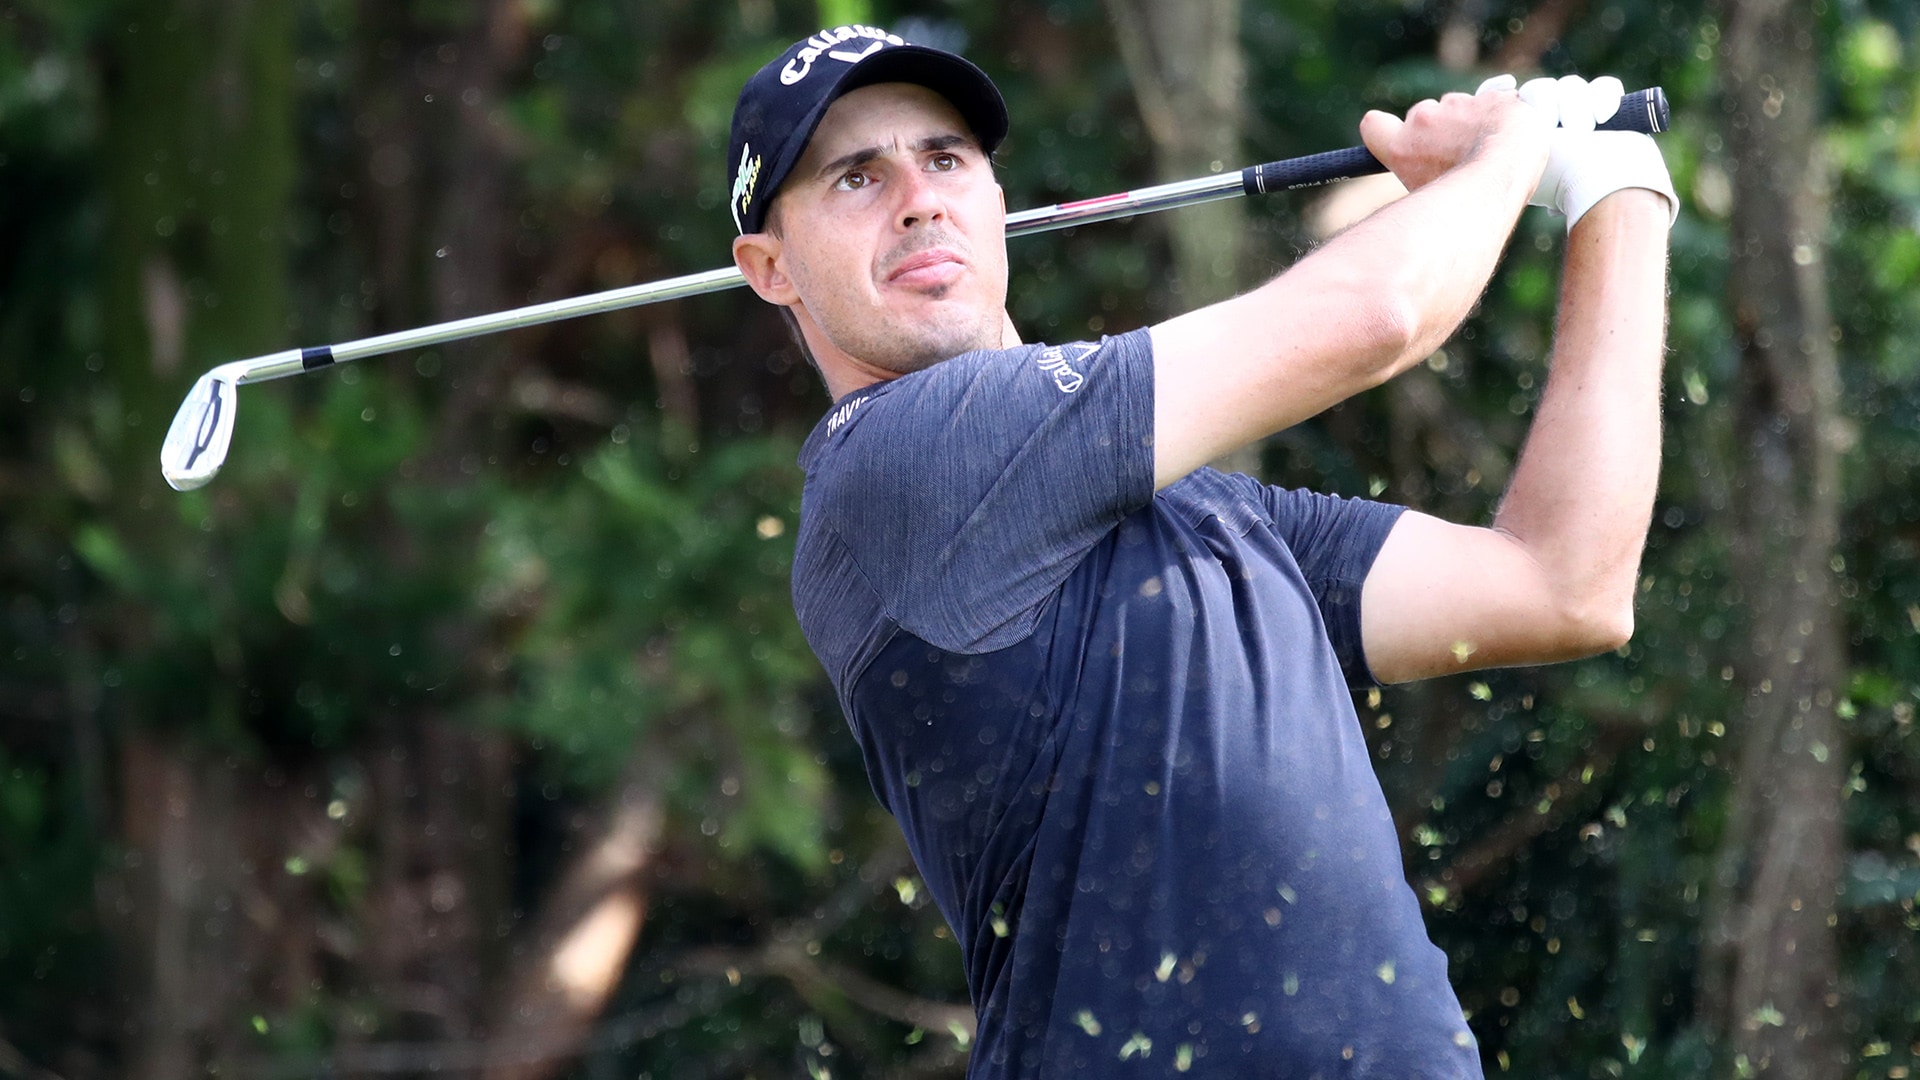 Chase Koepka added to Workday field at Muirfield Village